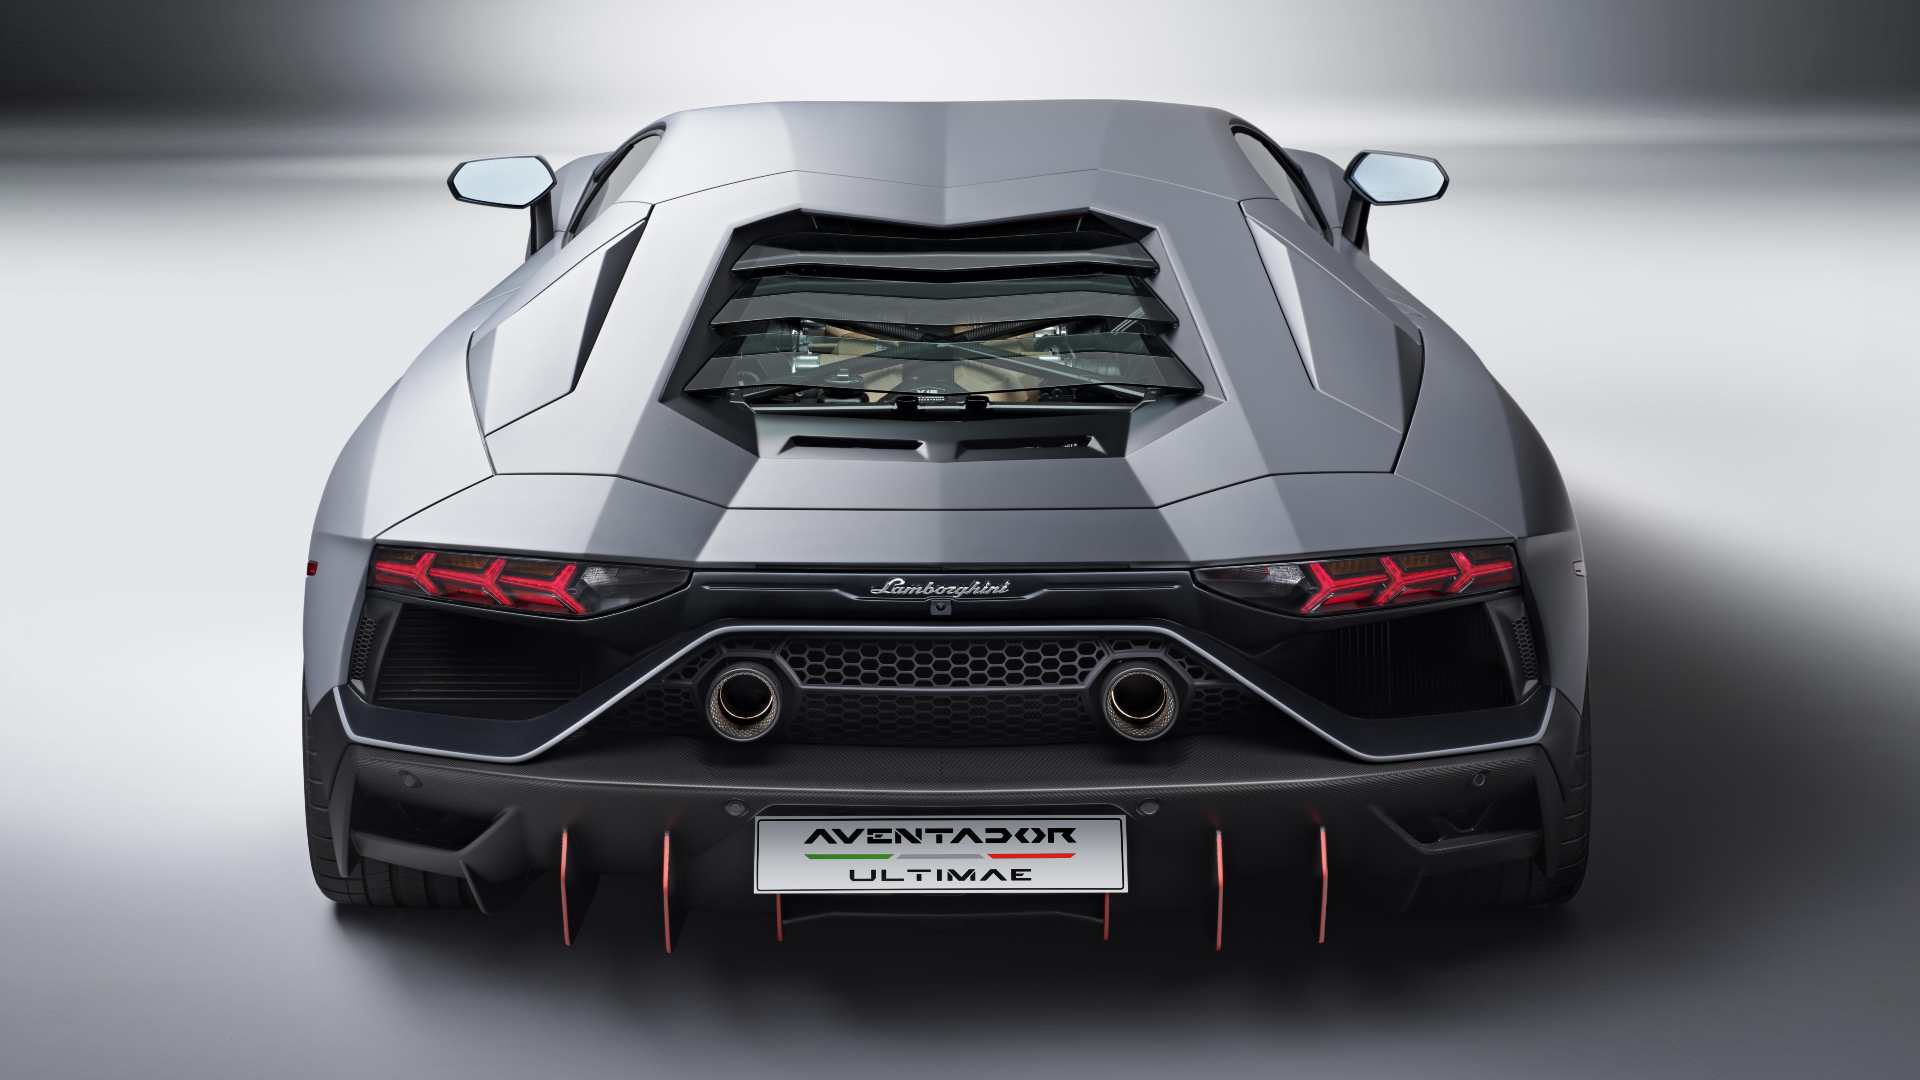 Lamborghini Aventador Ultimae is coming to India this year – but